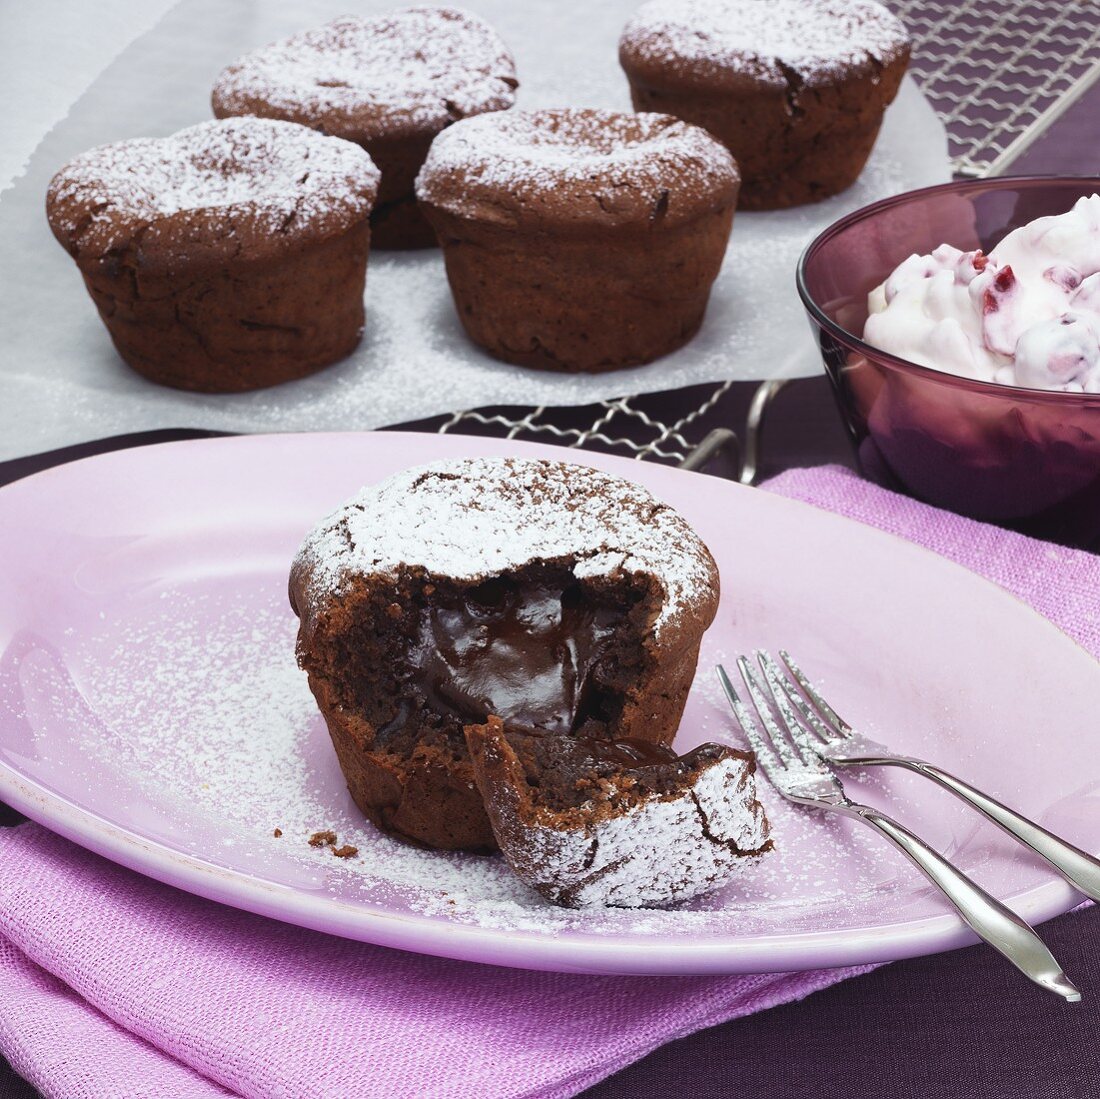 Chocolate puddings with liquid centres